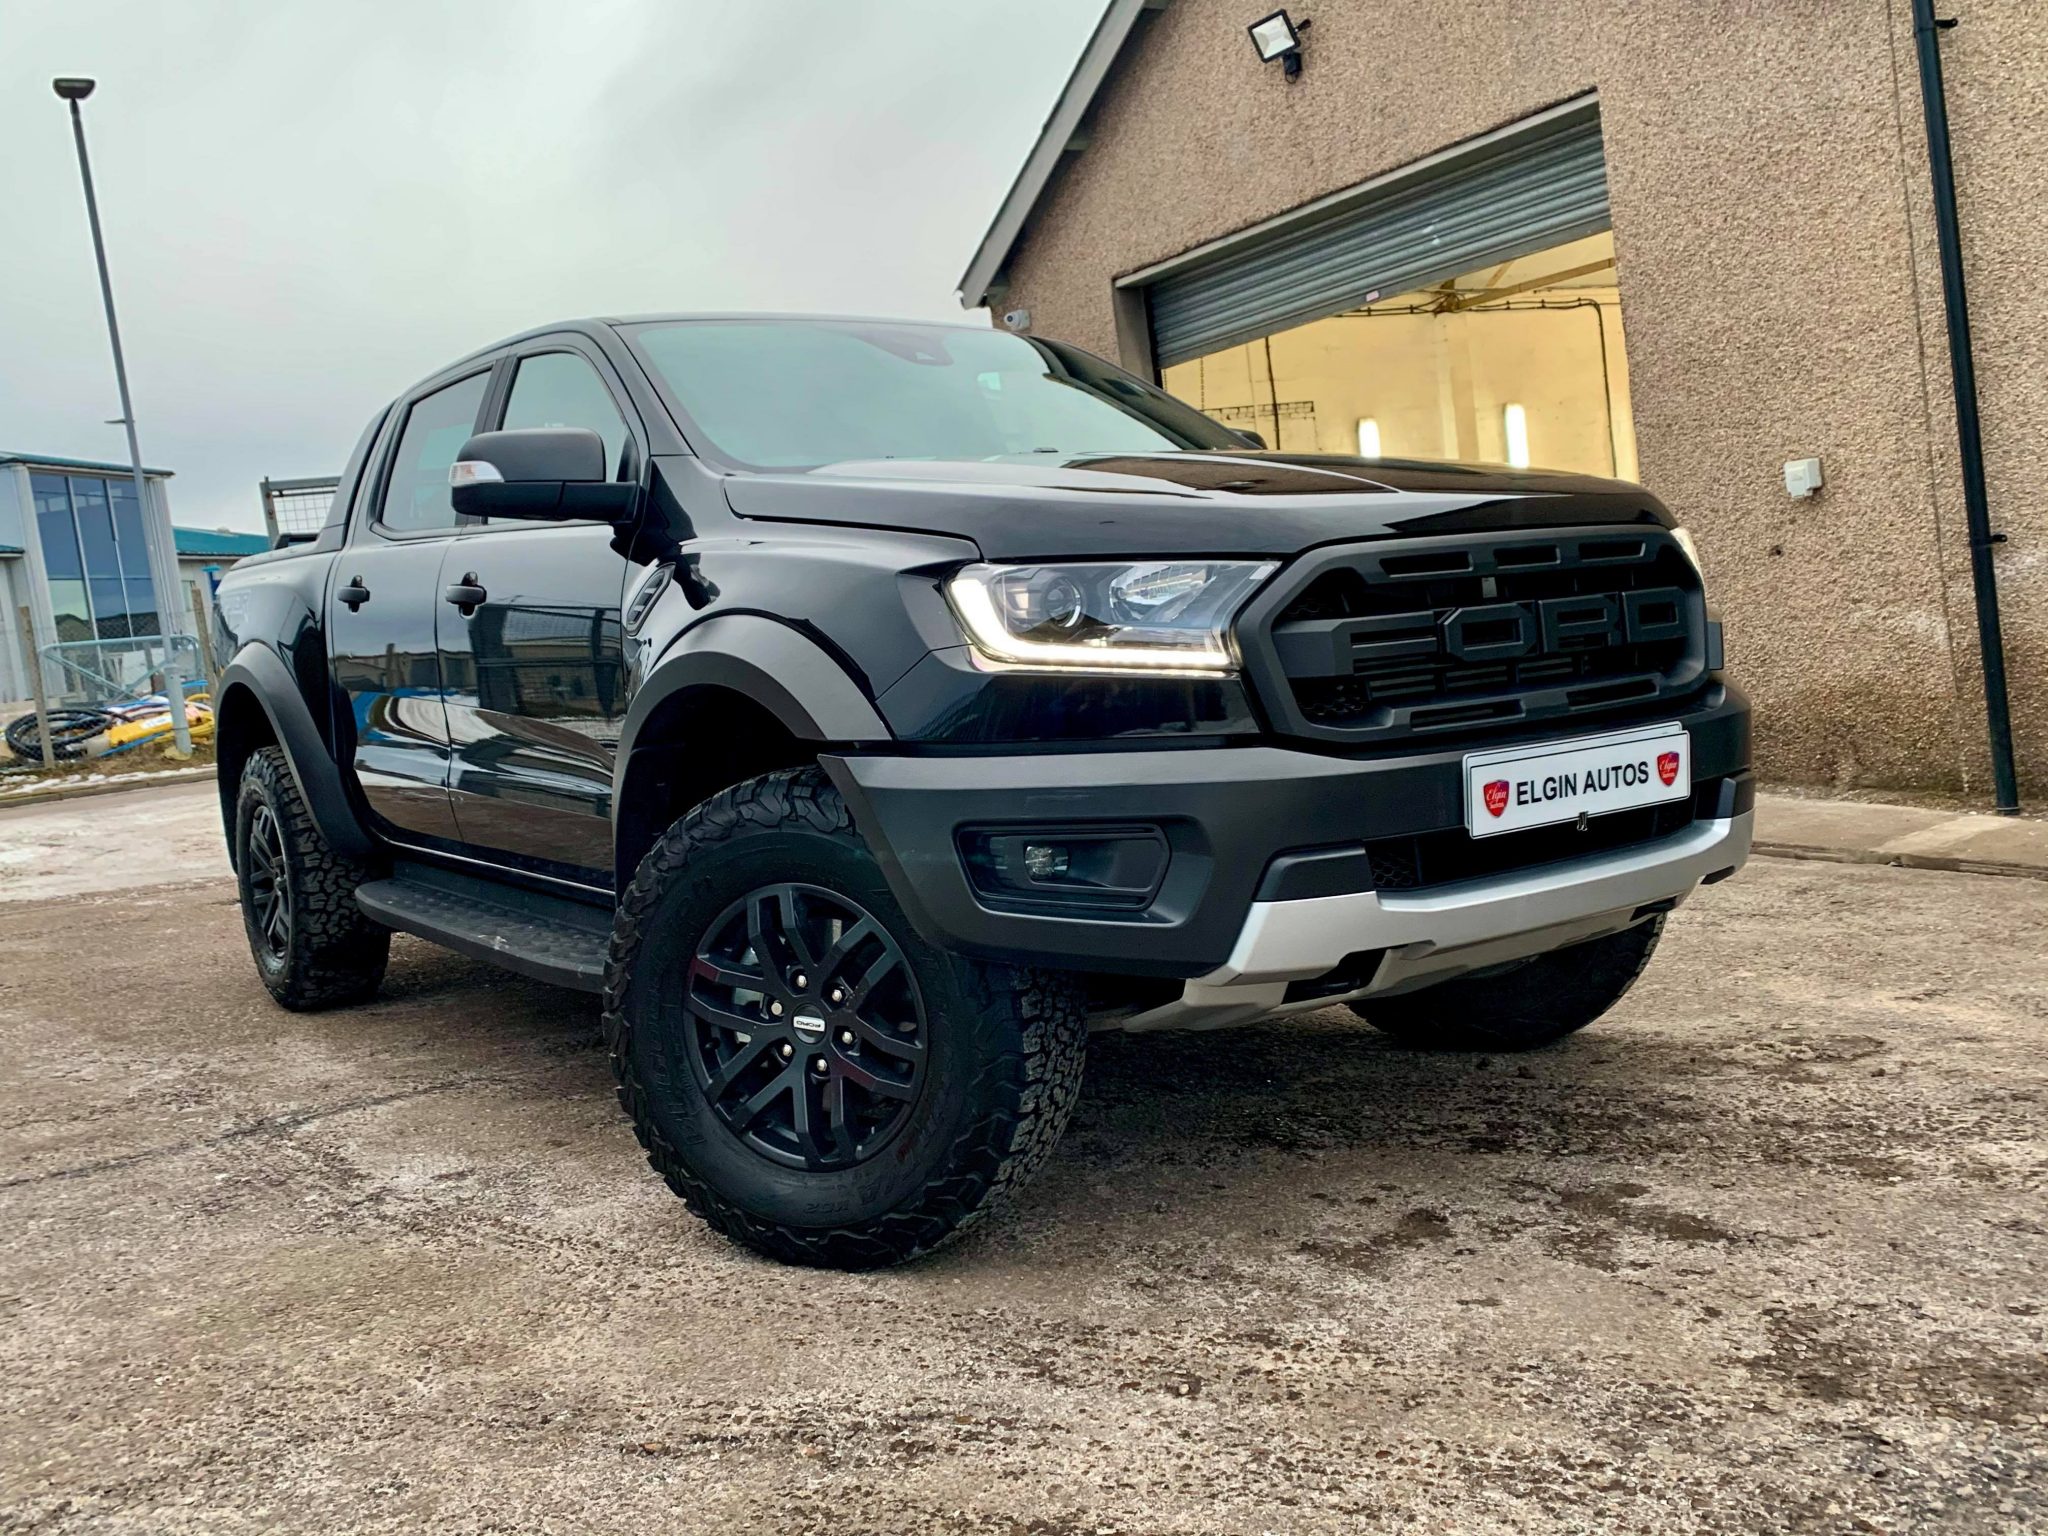 2020 Ford Ranger Raptor - Bounty Competitions